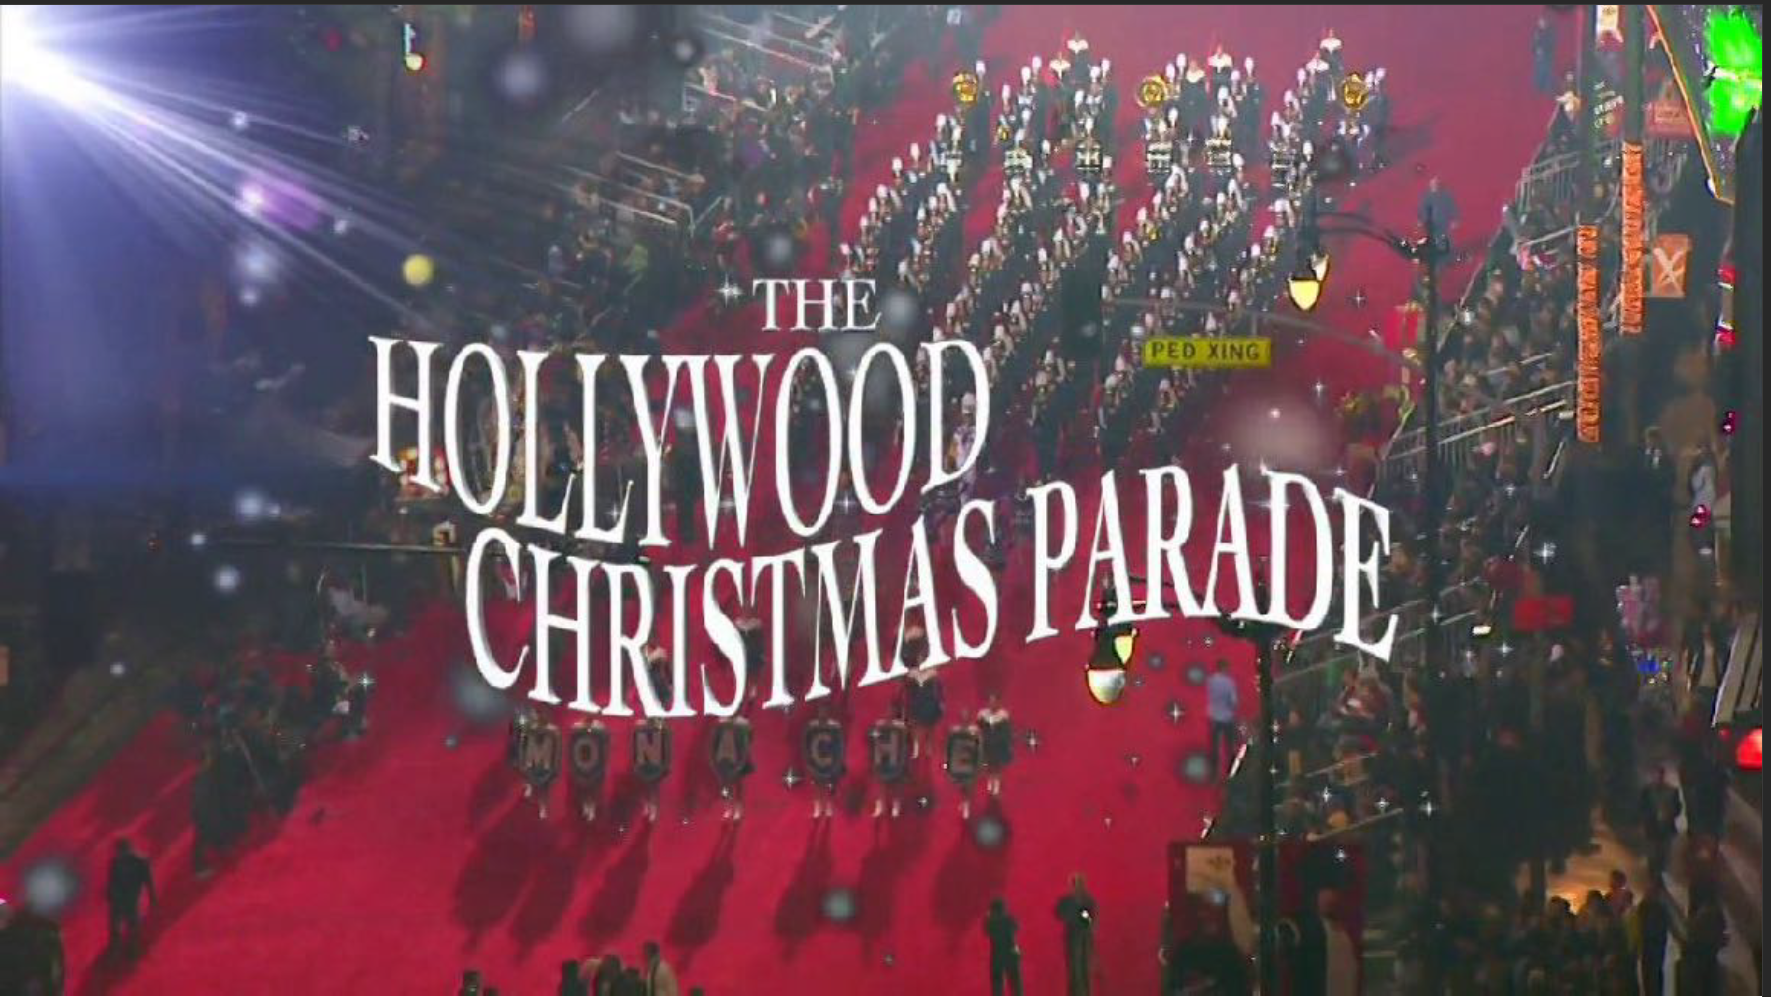 Hollywood Christmas Parade image with text overlaid.